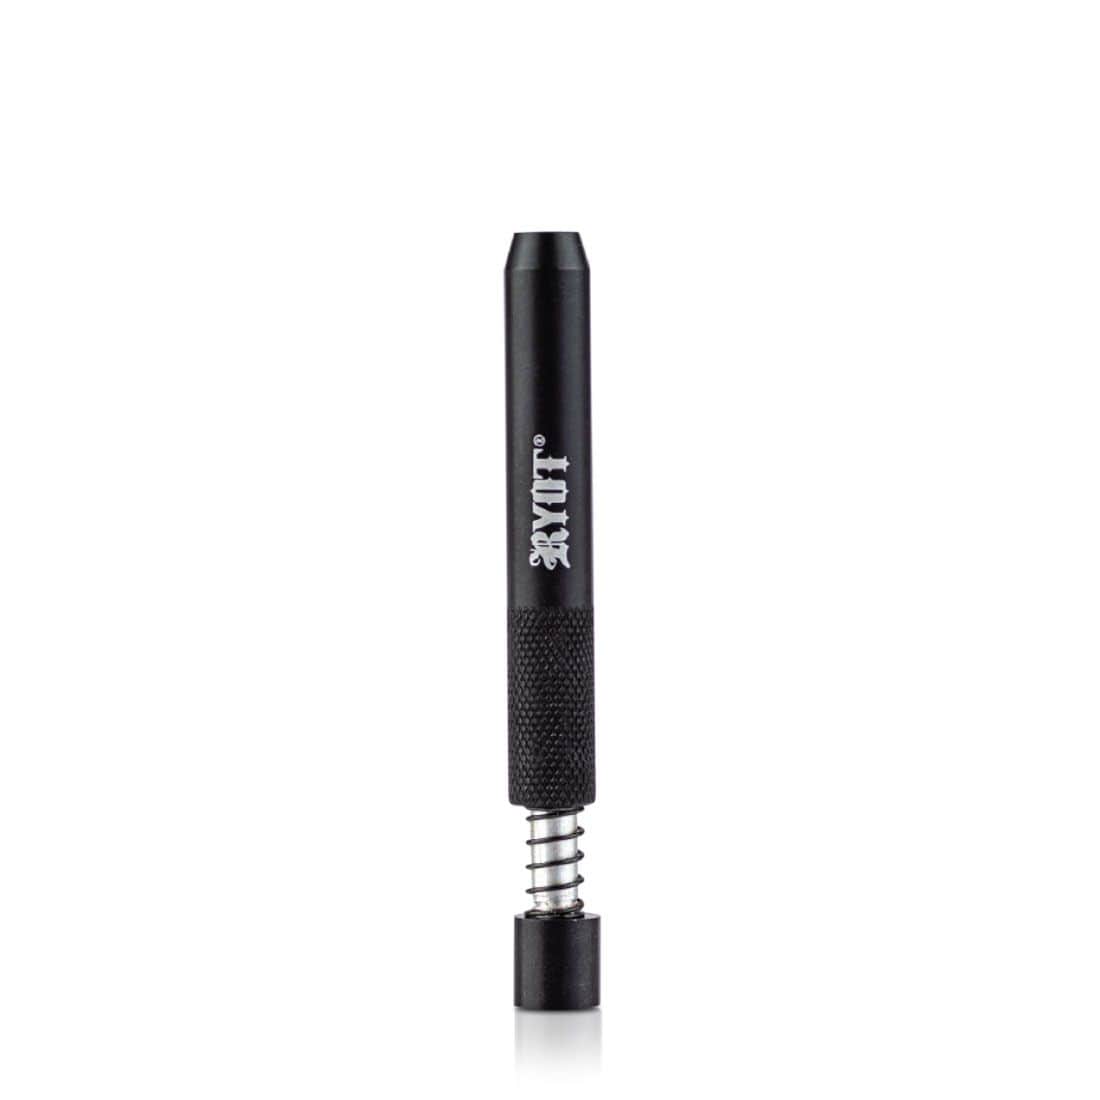 RYOT Gear Accessory Black RYOT Anodized Spring One Hitter